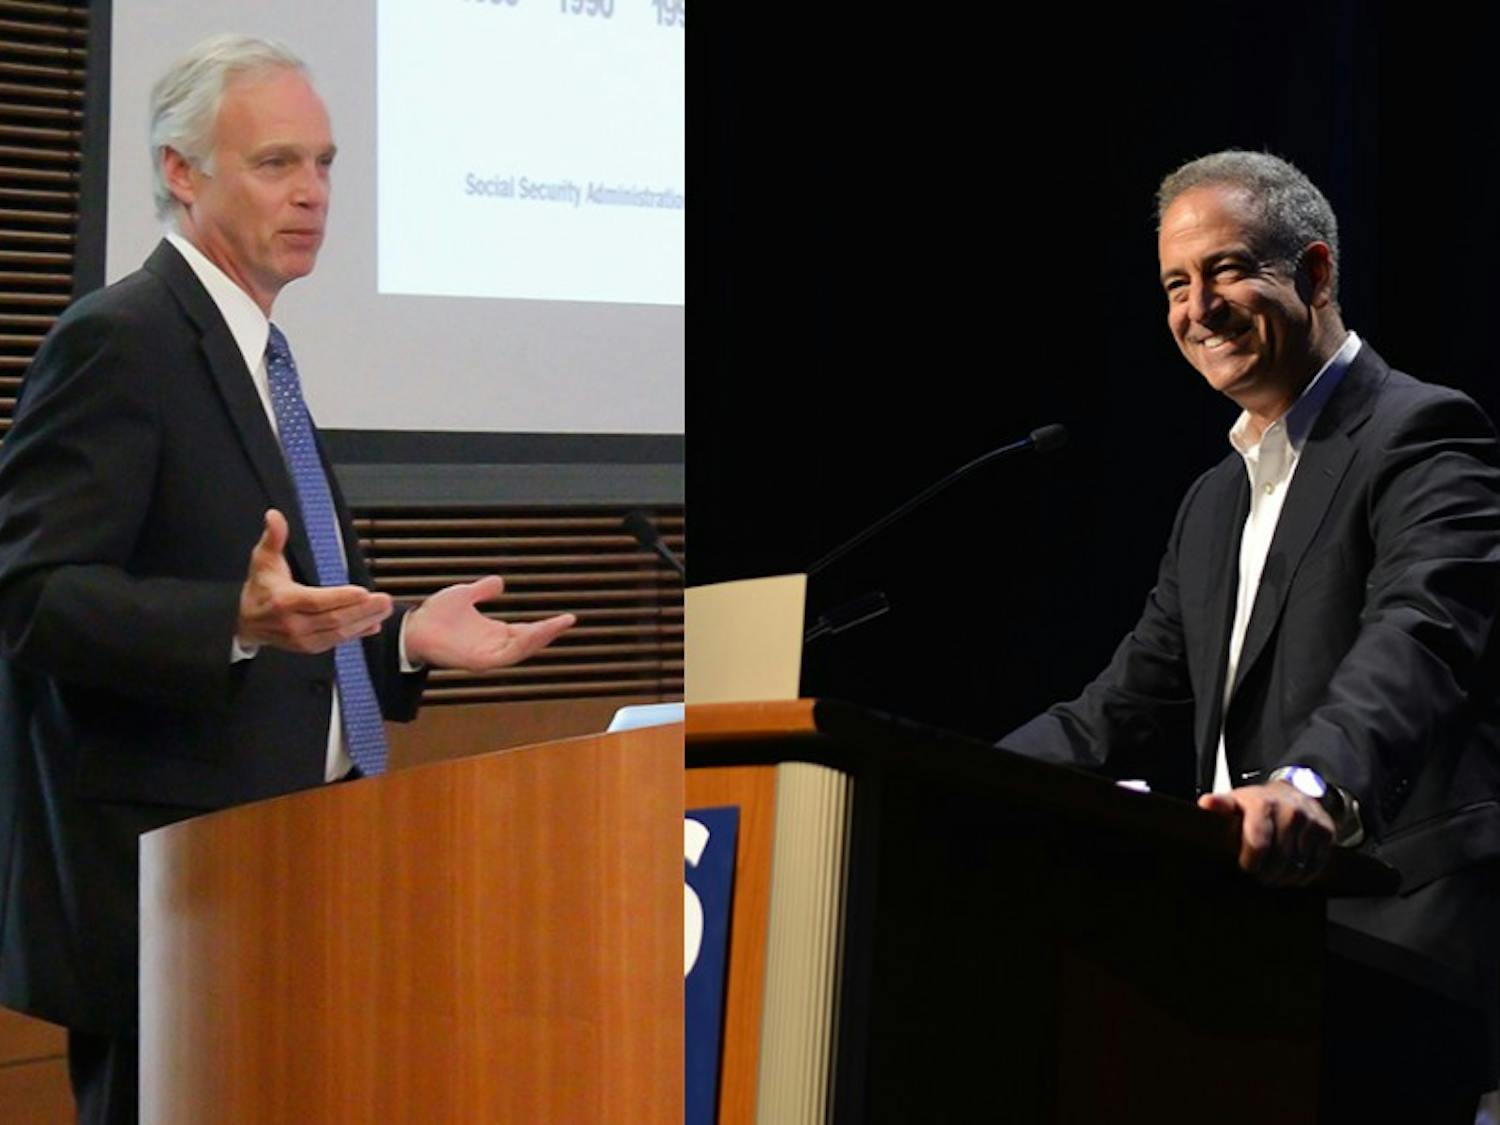 Democratic challenger Russ Feingold leads incumbent Ron Johnson by four points in the most recent Marquette University Law School poll. The race is a rematch from 2010, when Johnson defeated Feingold.